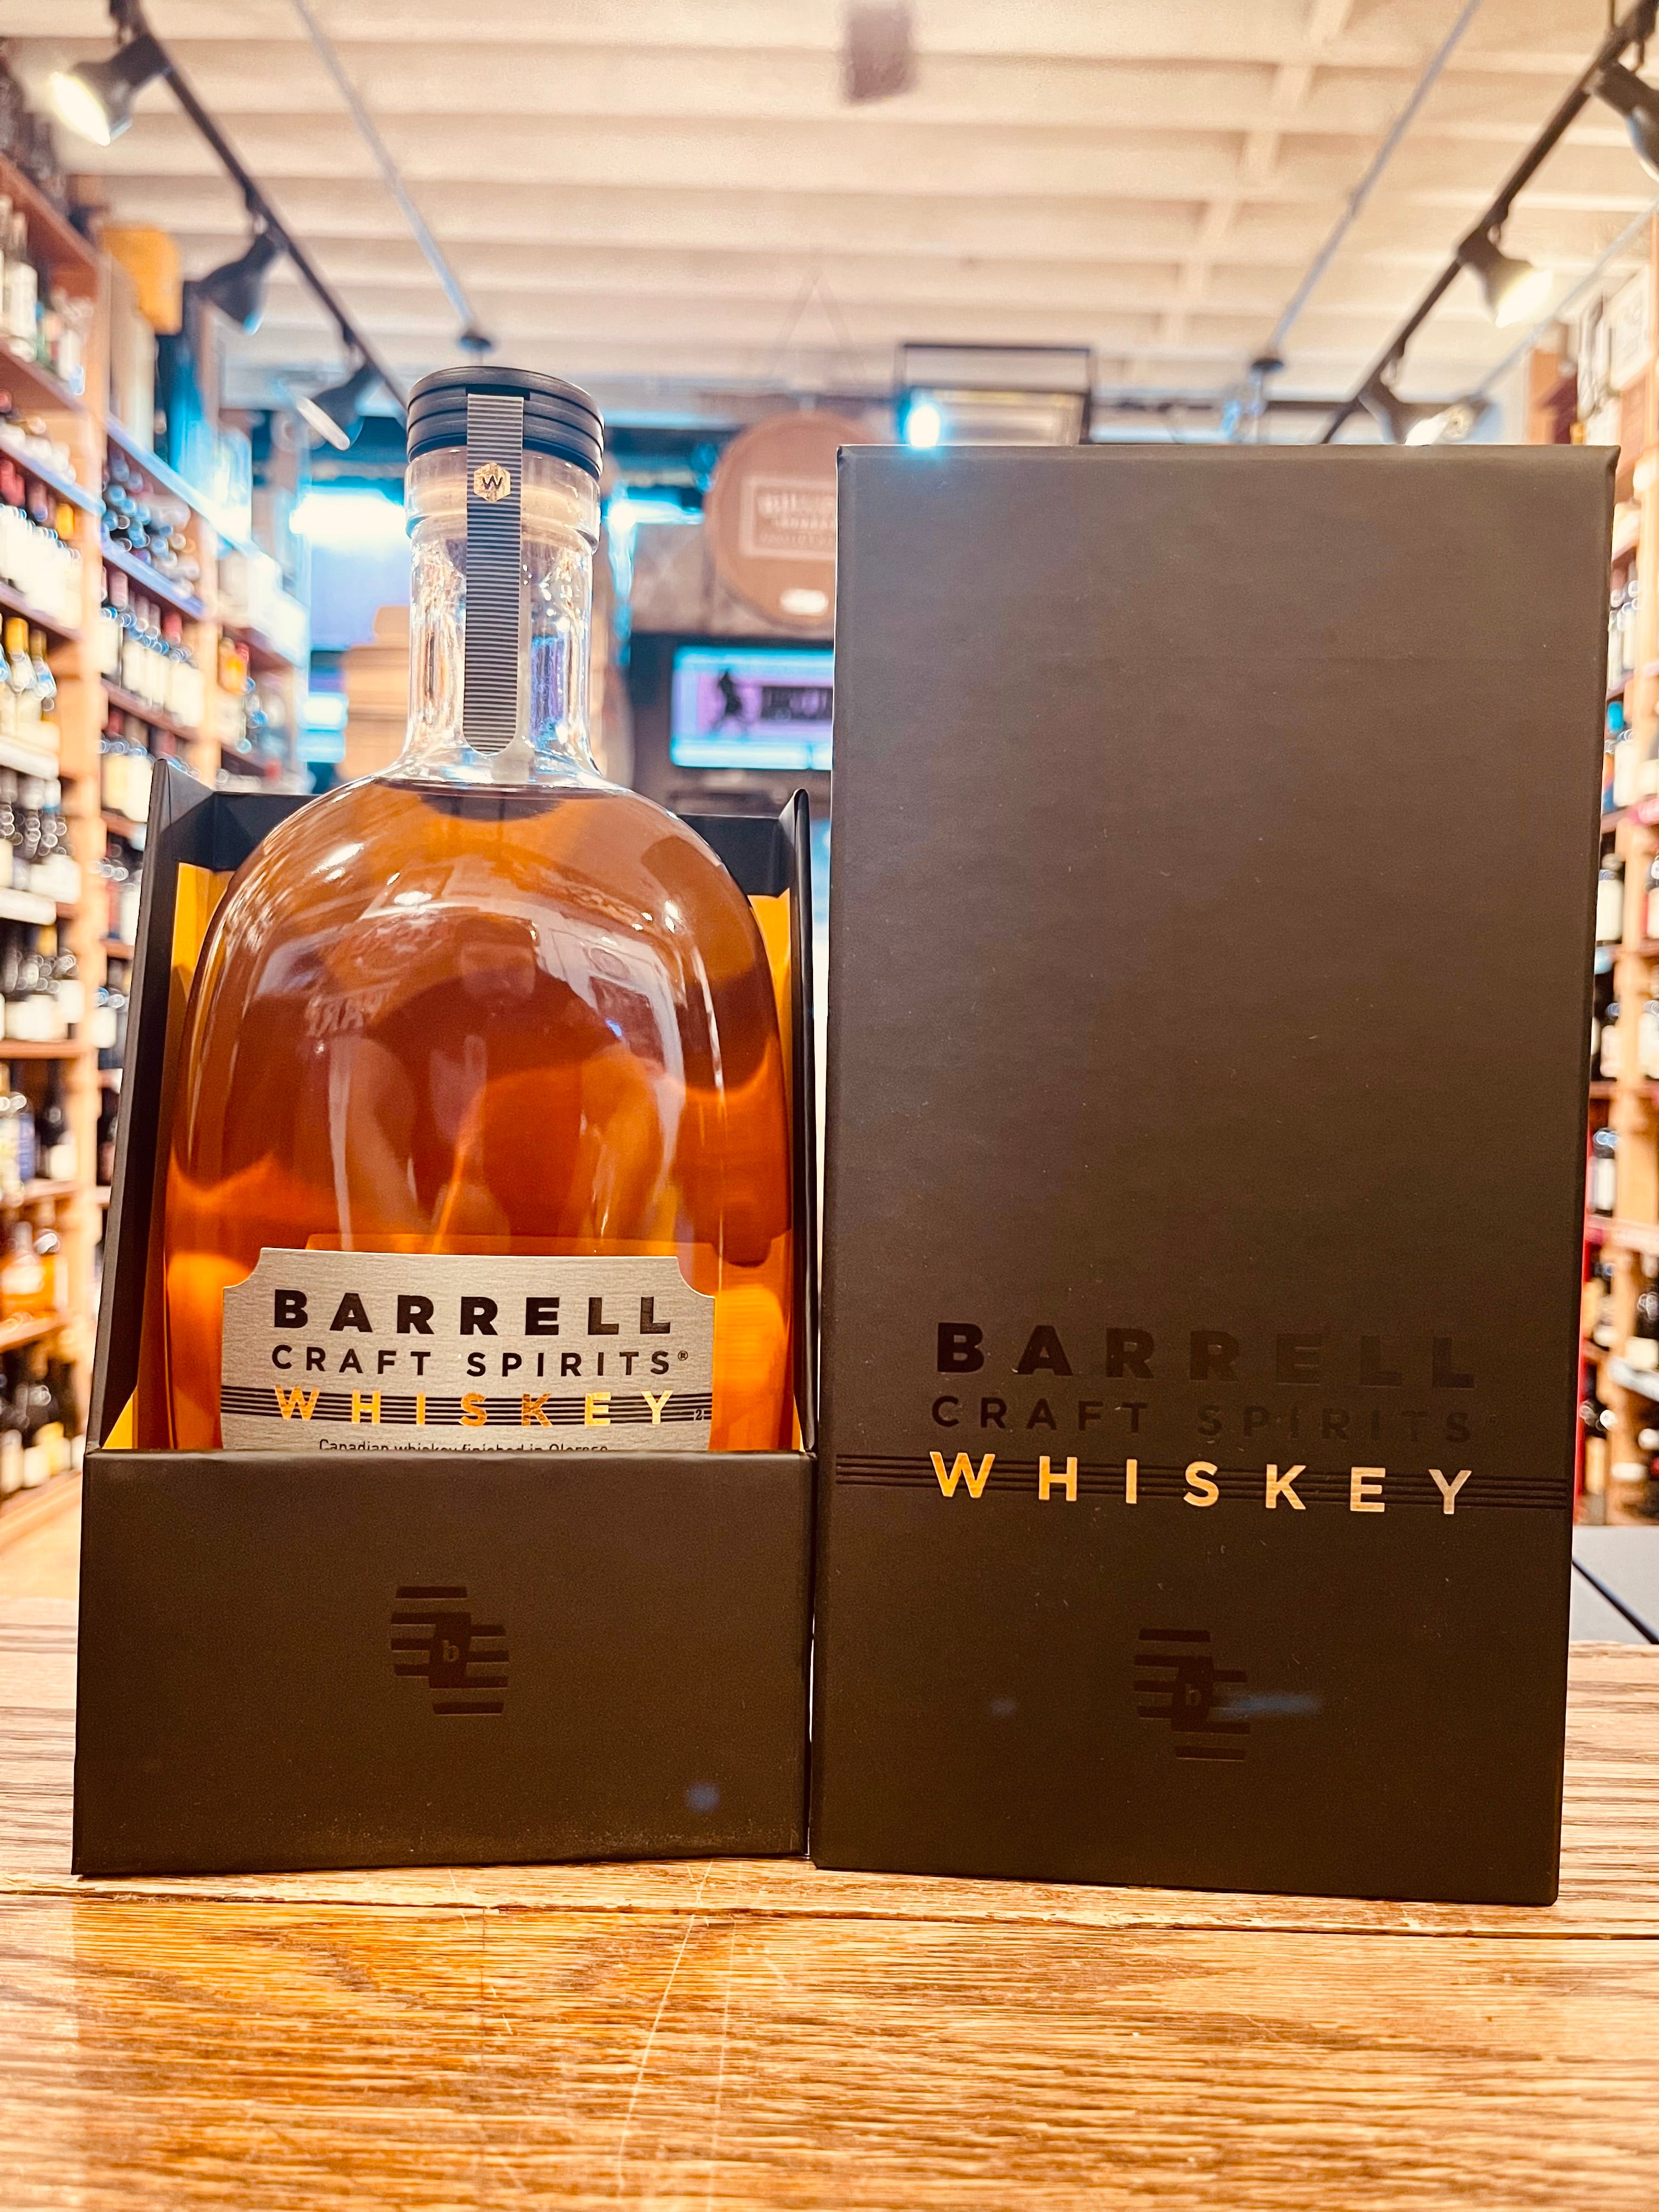 Barrell Craft Spirits Whiskey (Gray Label) black box with reflective and gold lettering with an oval shaped clear bottel inside with silver labeling 